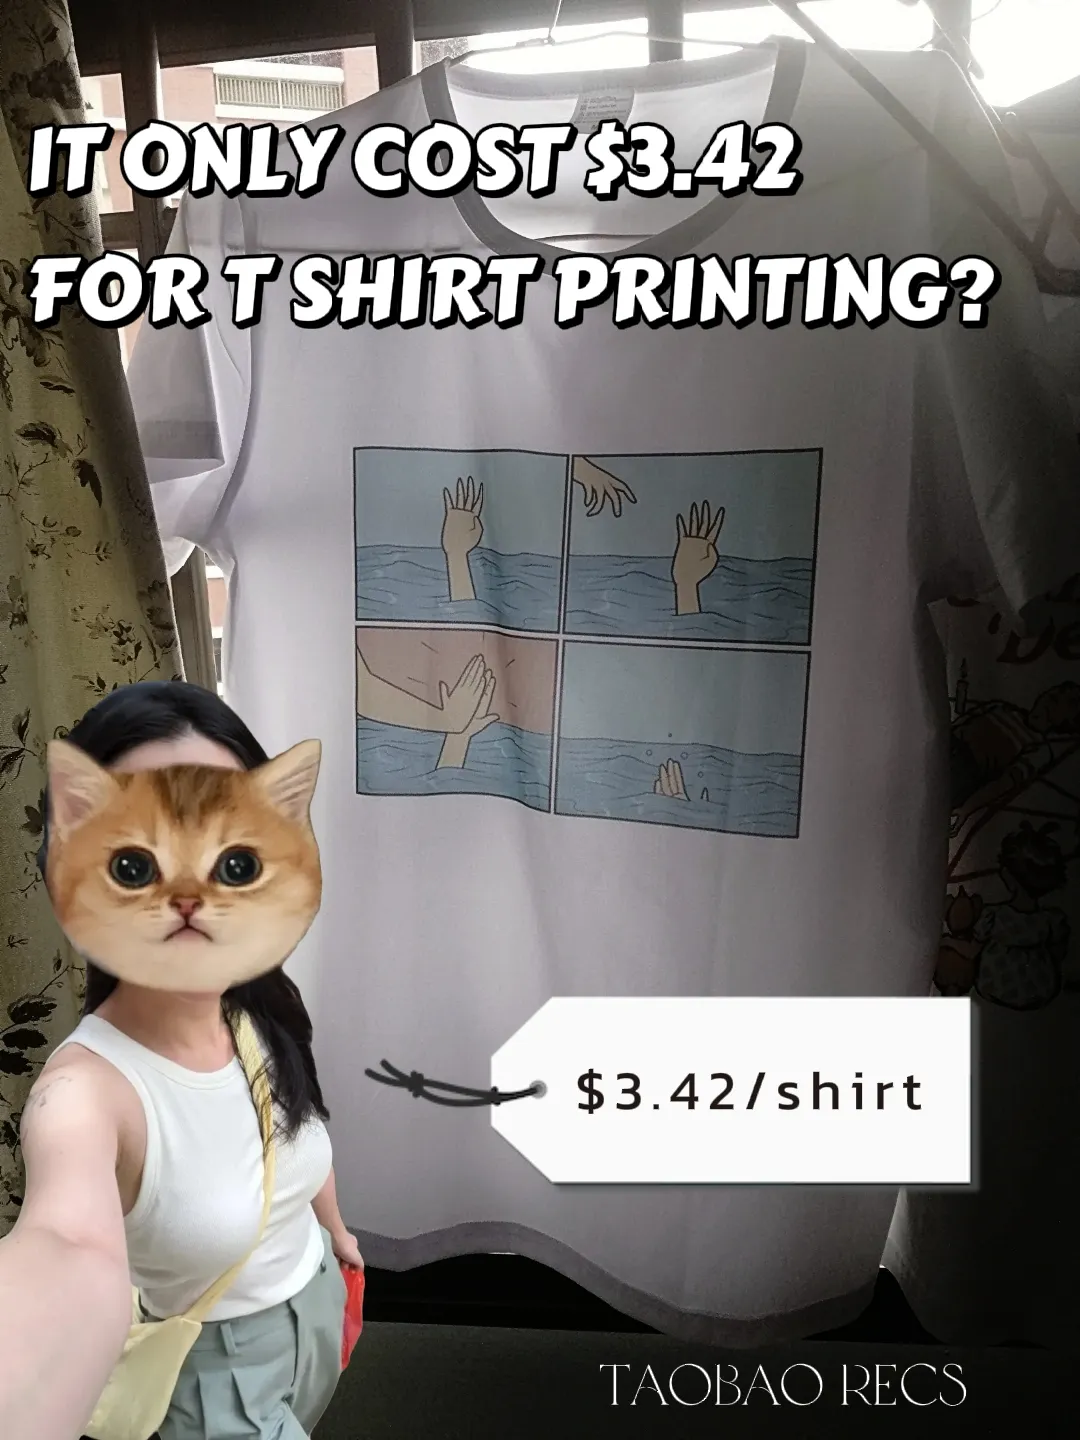 design your own t shirt at <$3.50! 🎨✨'s images